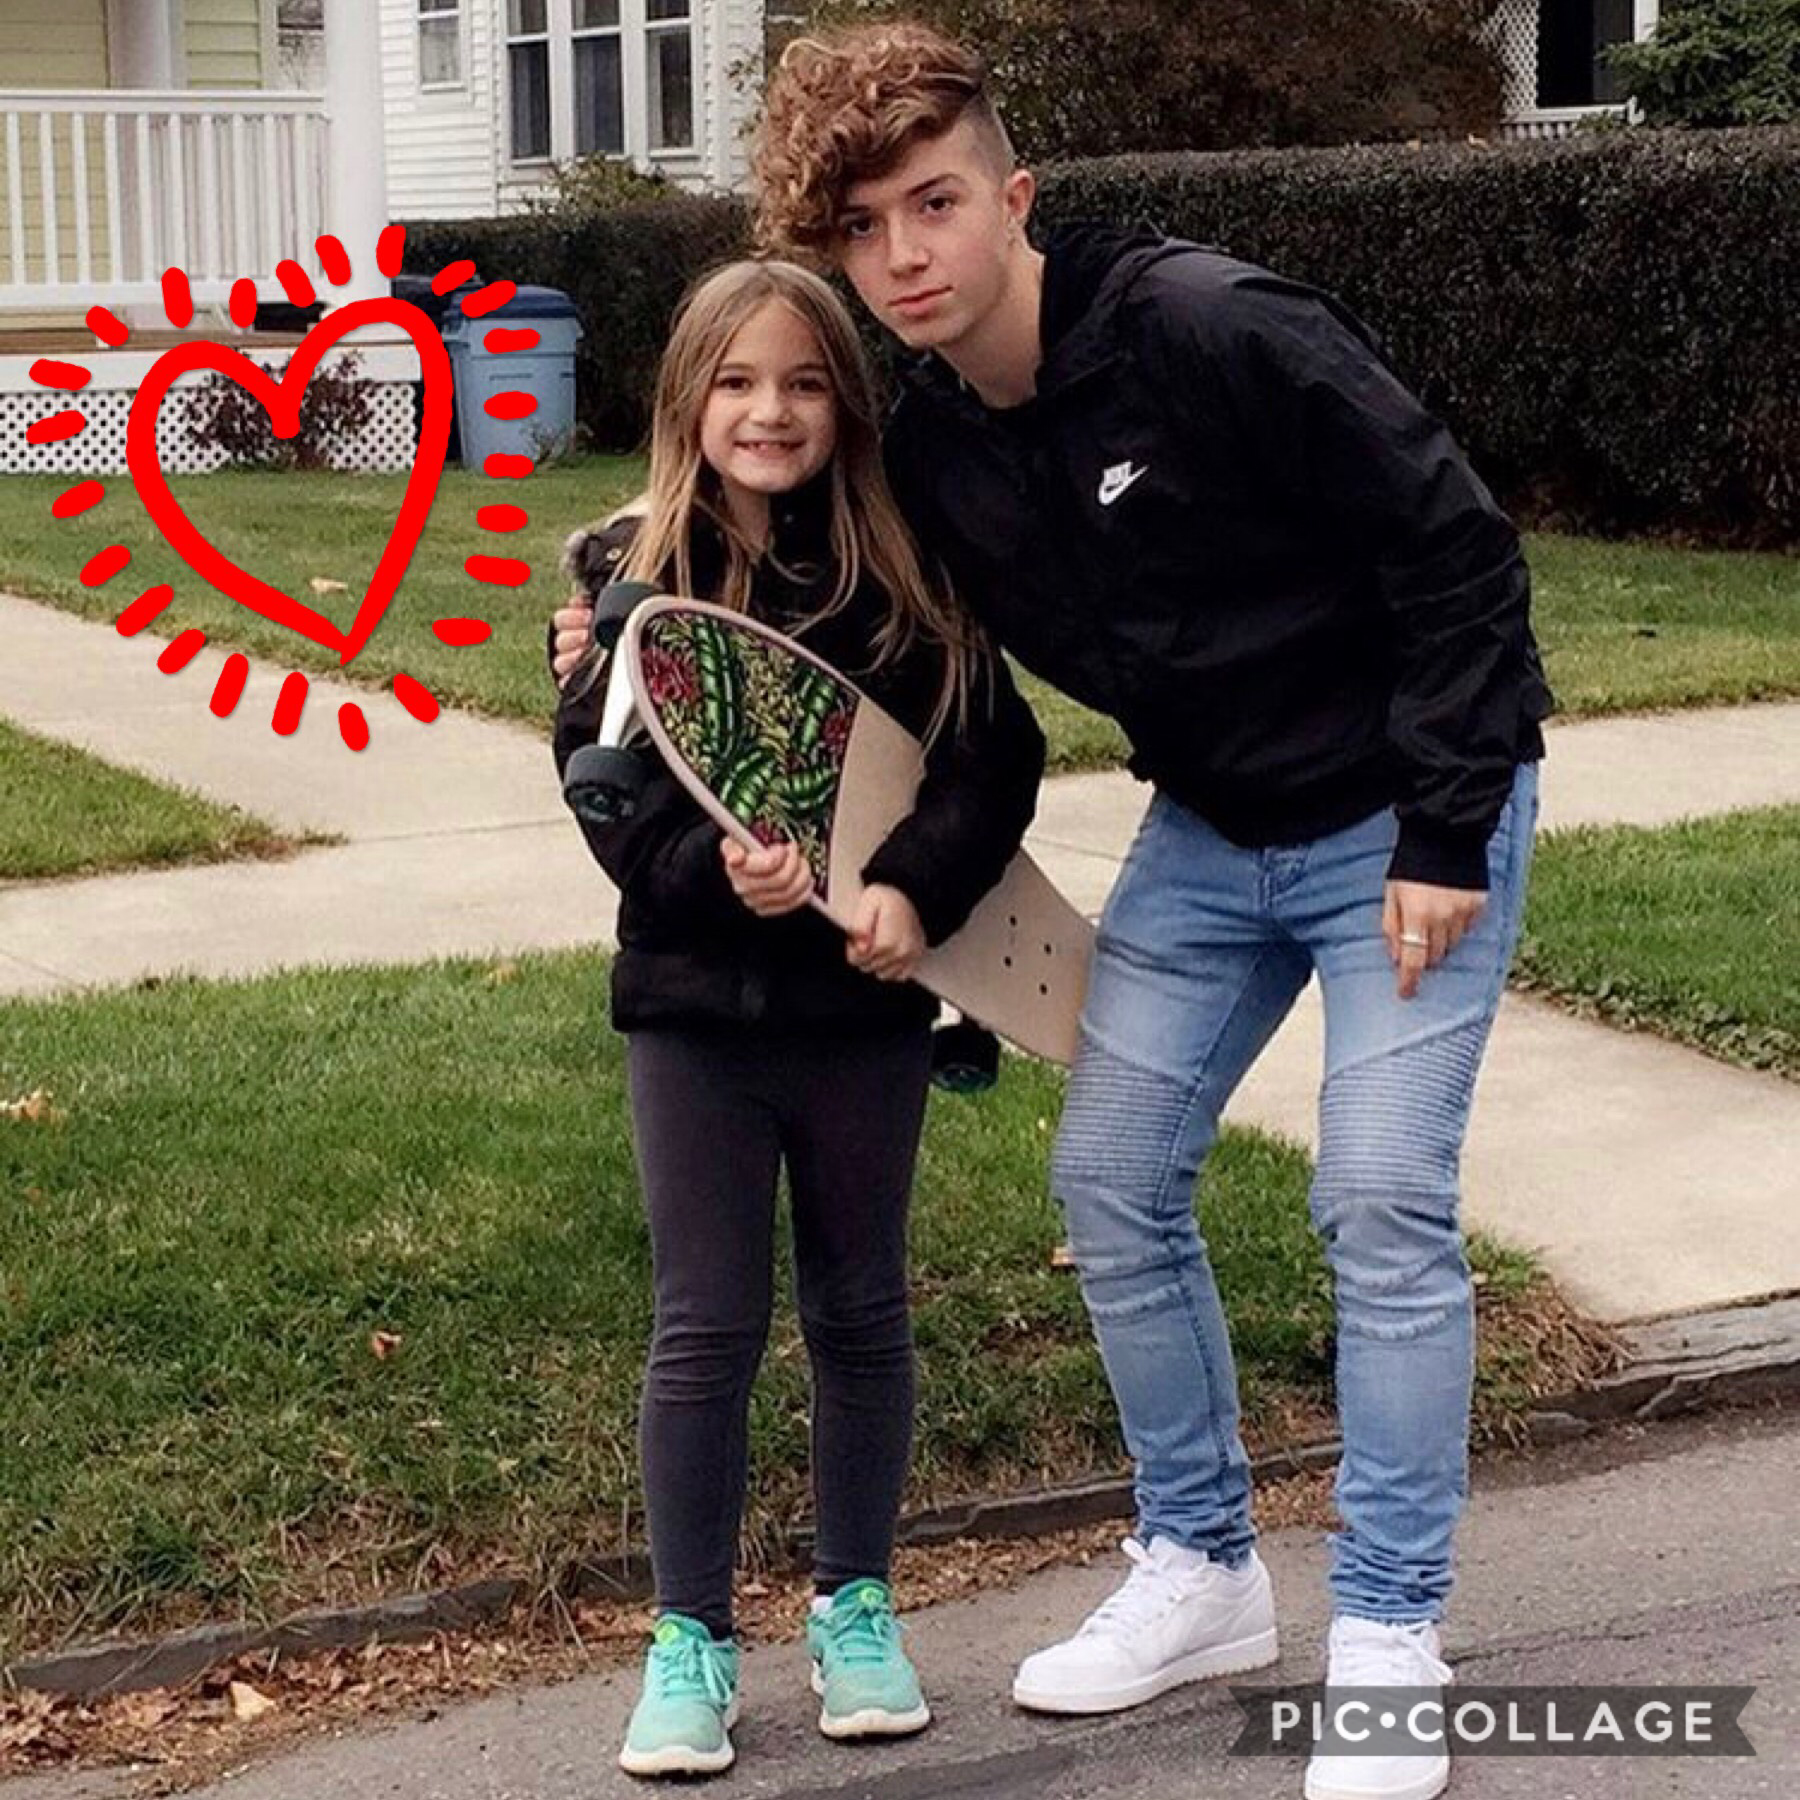 The awkward dad pose Jack is holding rn 😂♥️